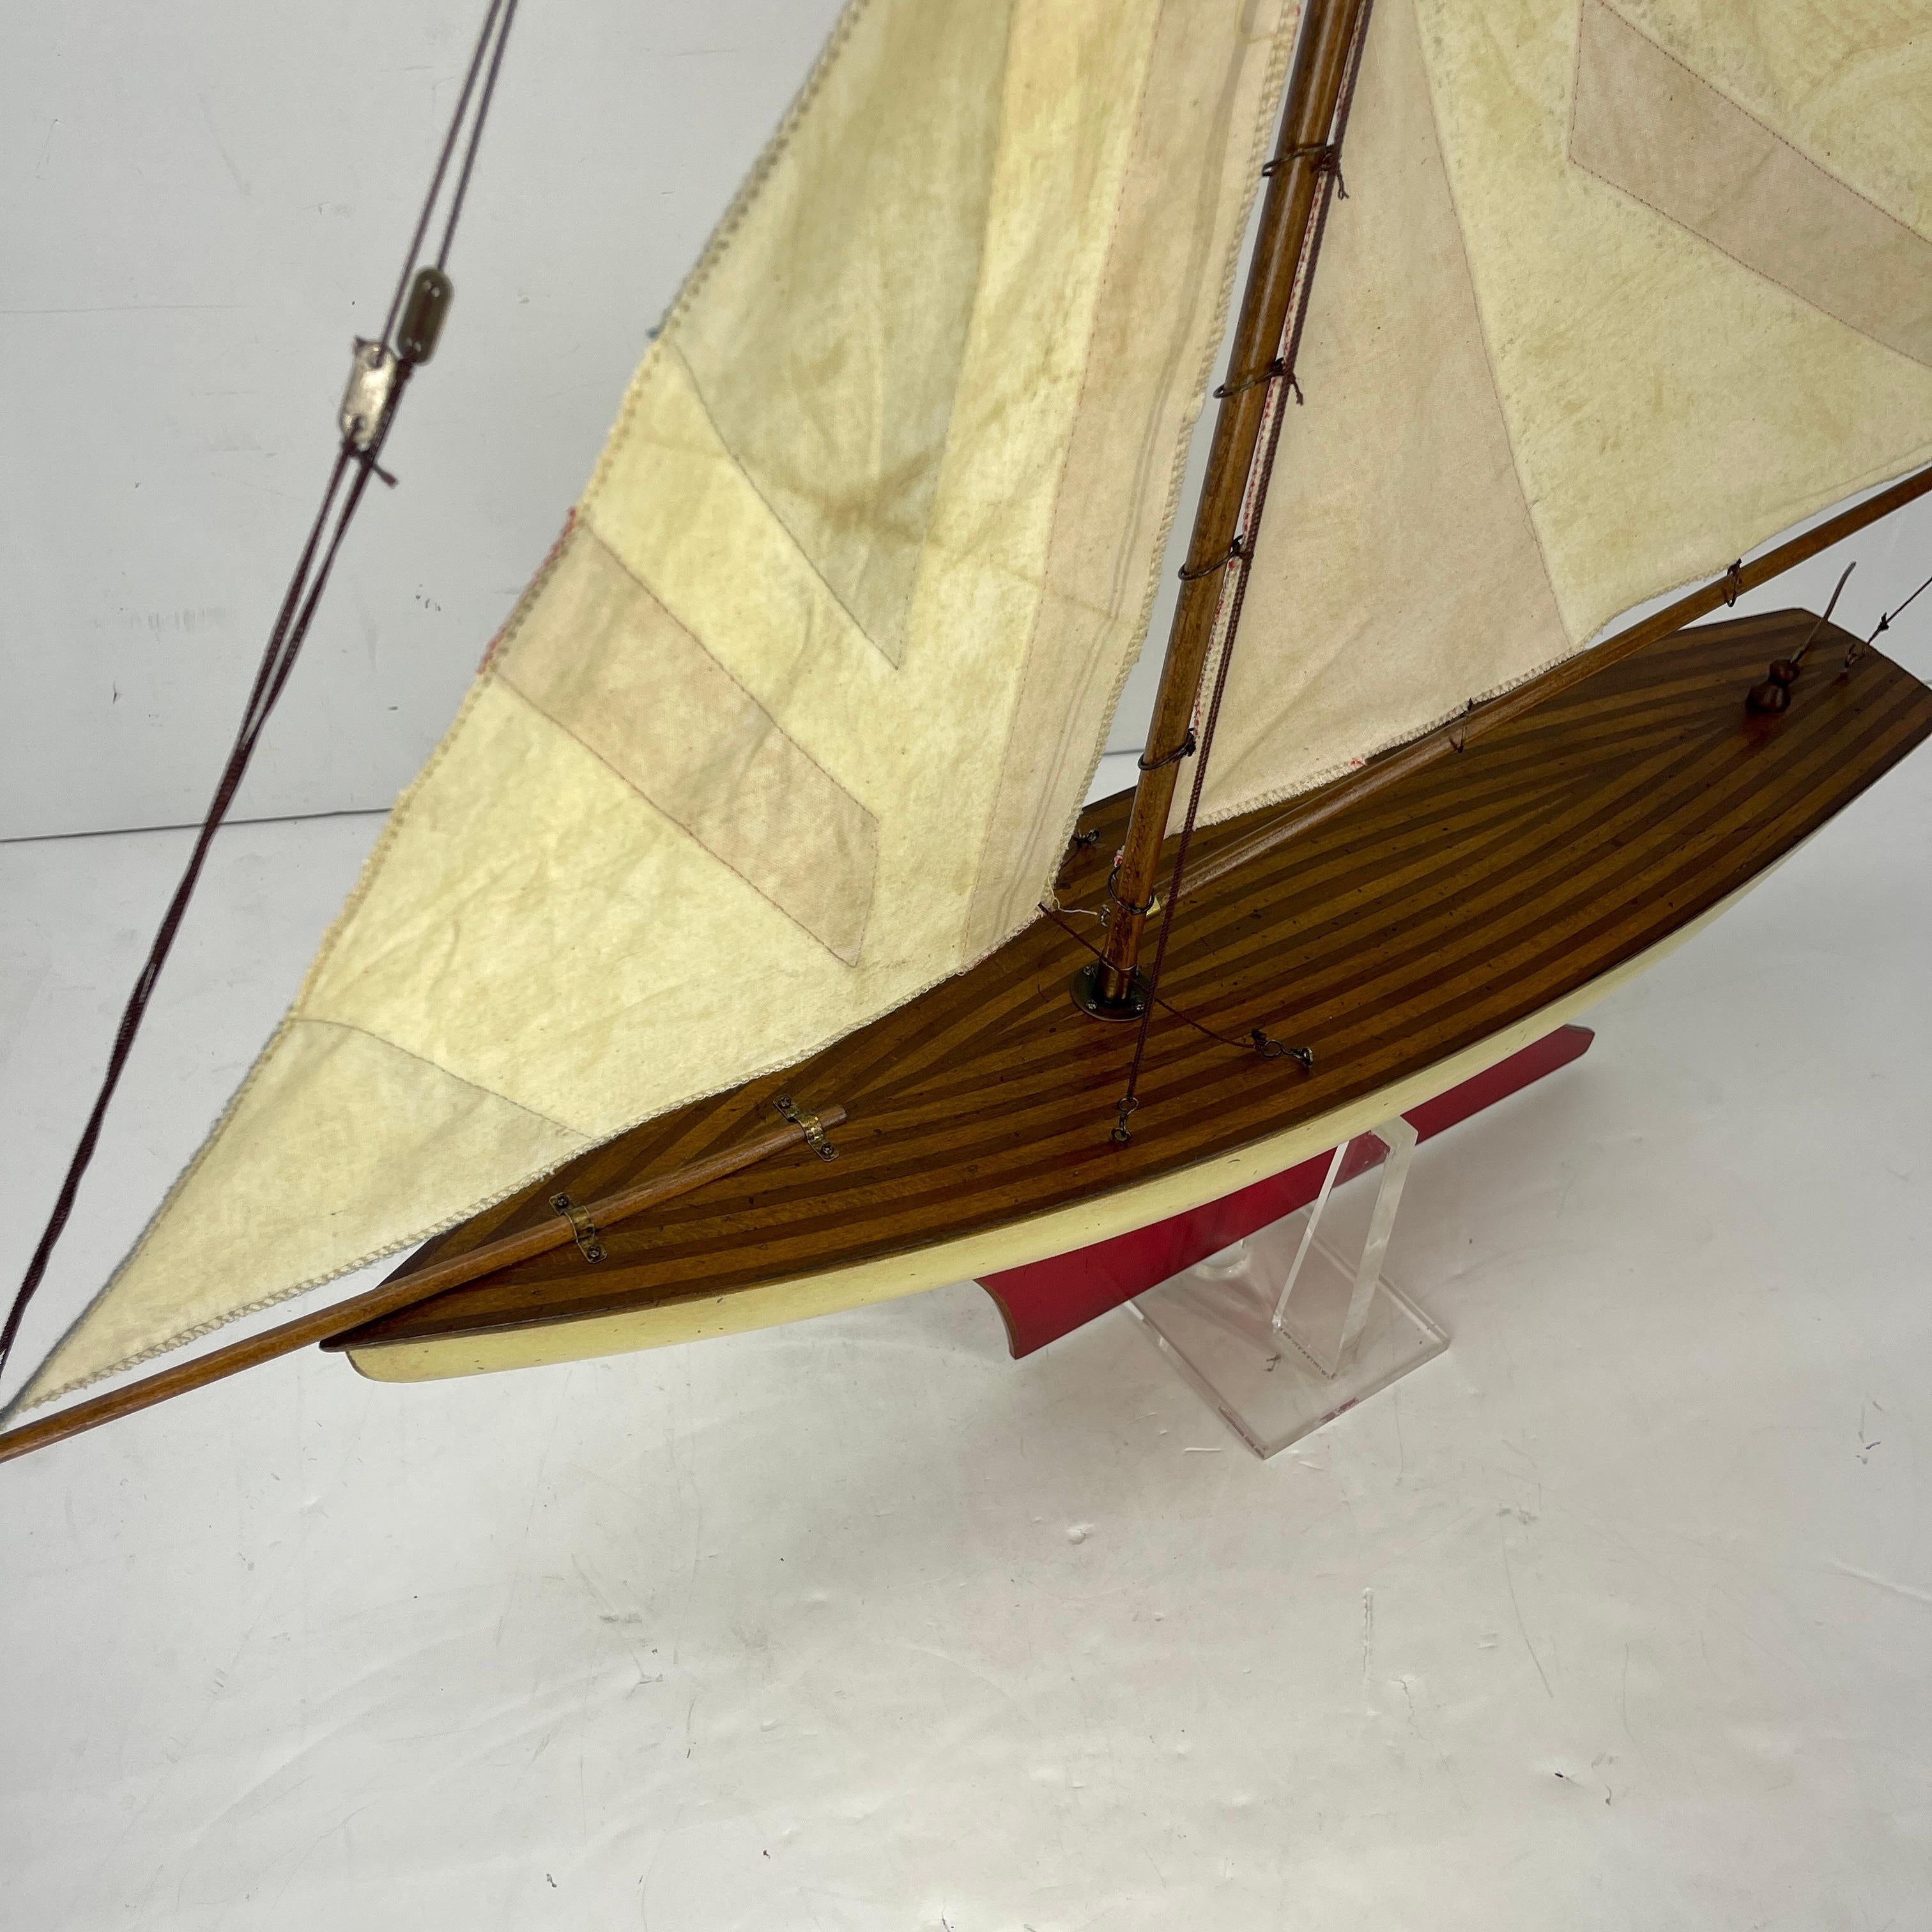 English Carved Wood Sailboat Model with Parquetry Deck and Union Jack Sailcloth 8